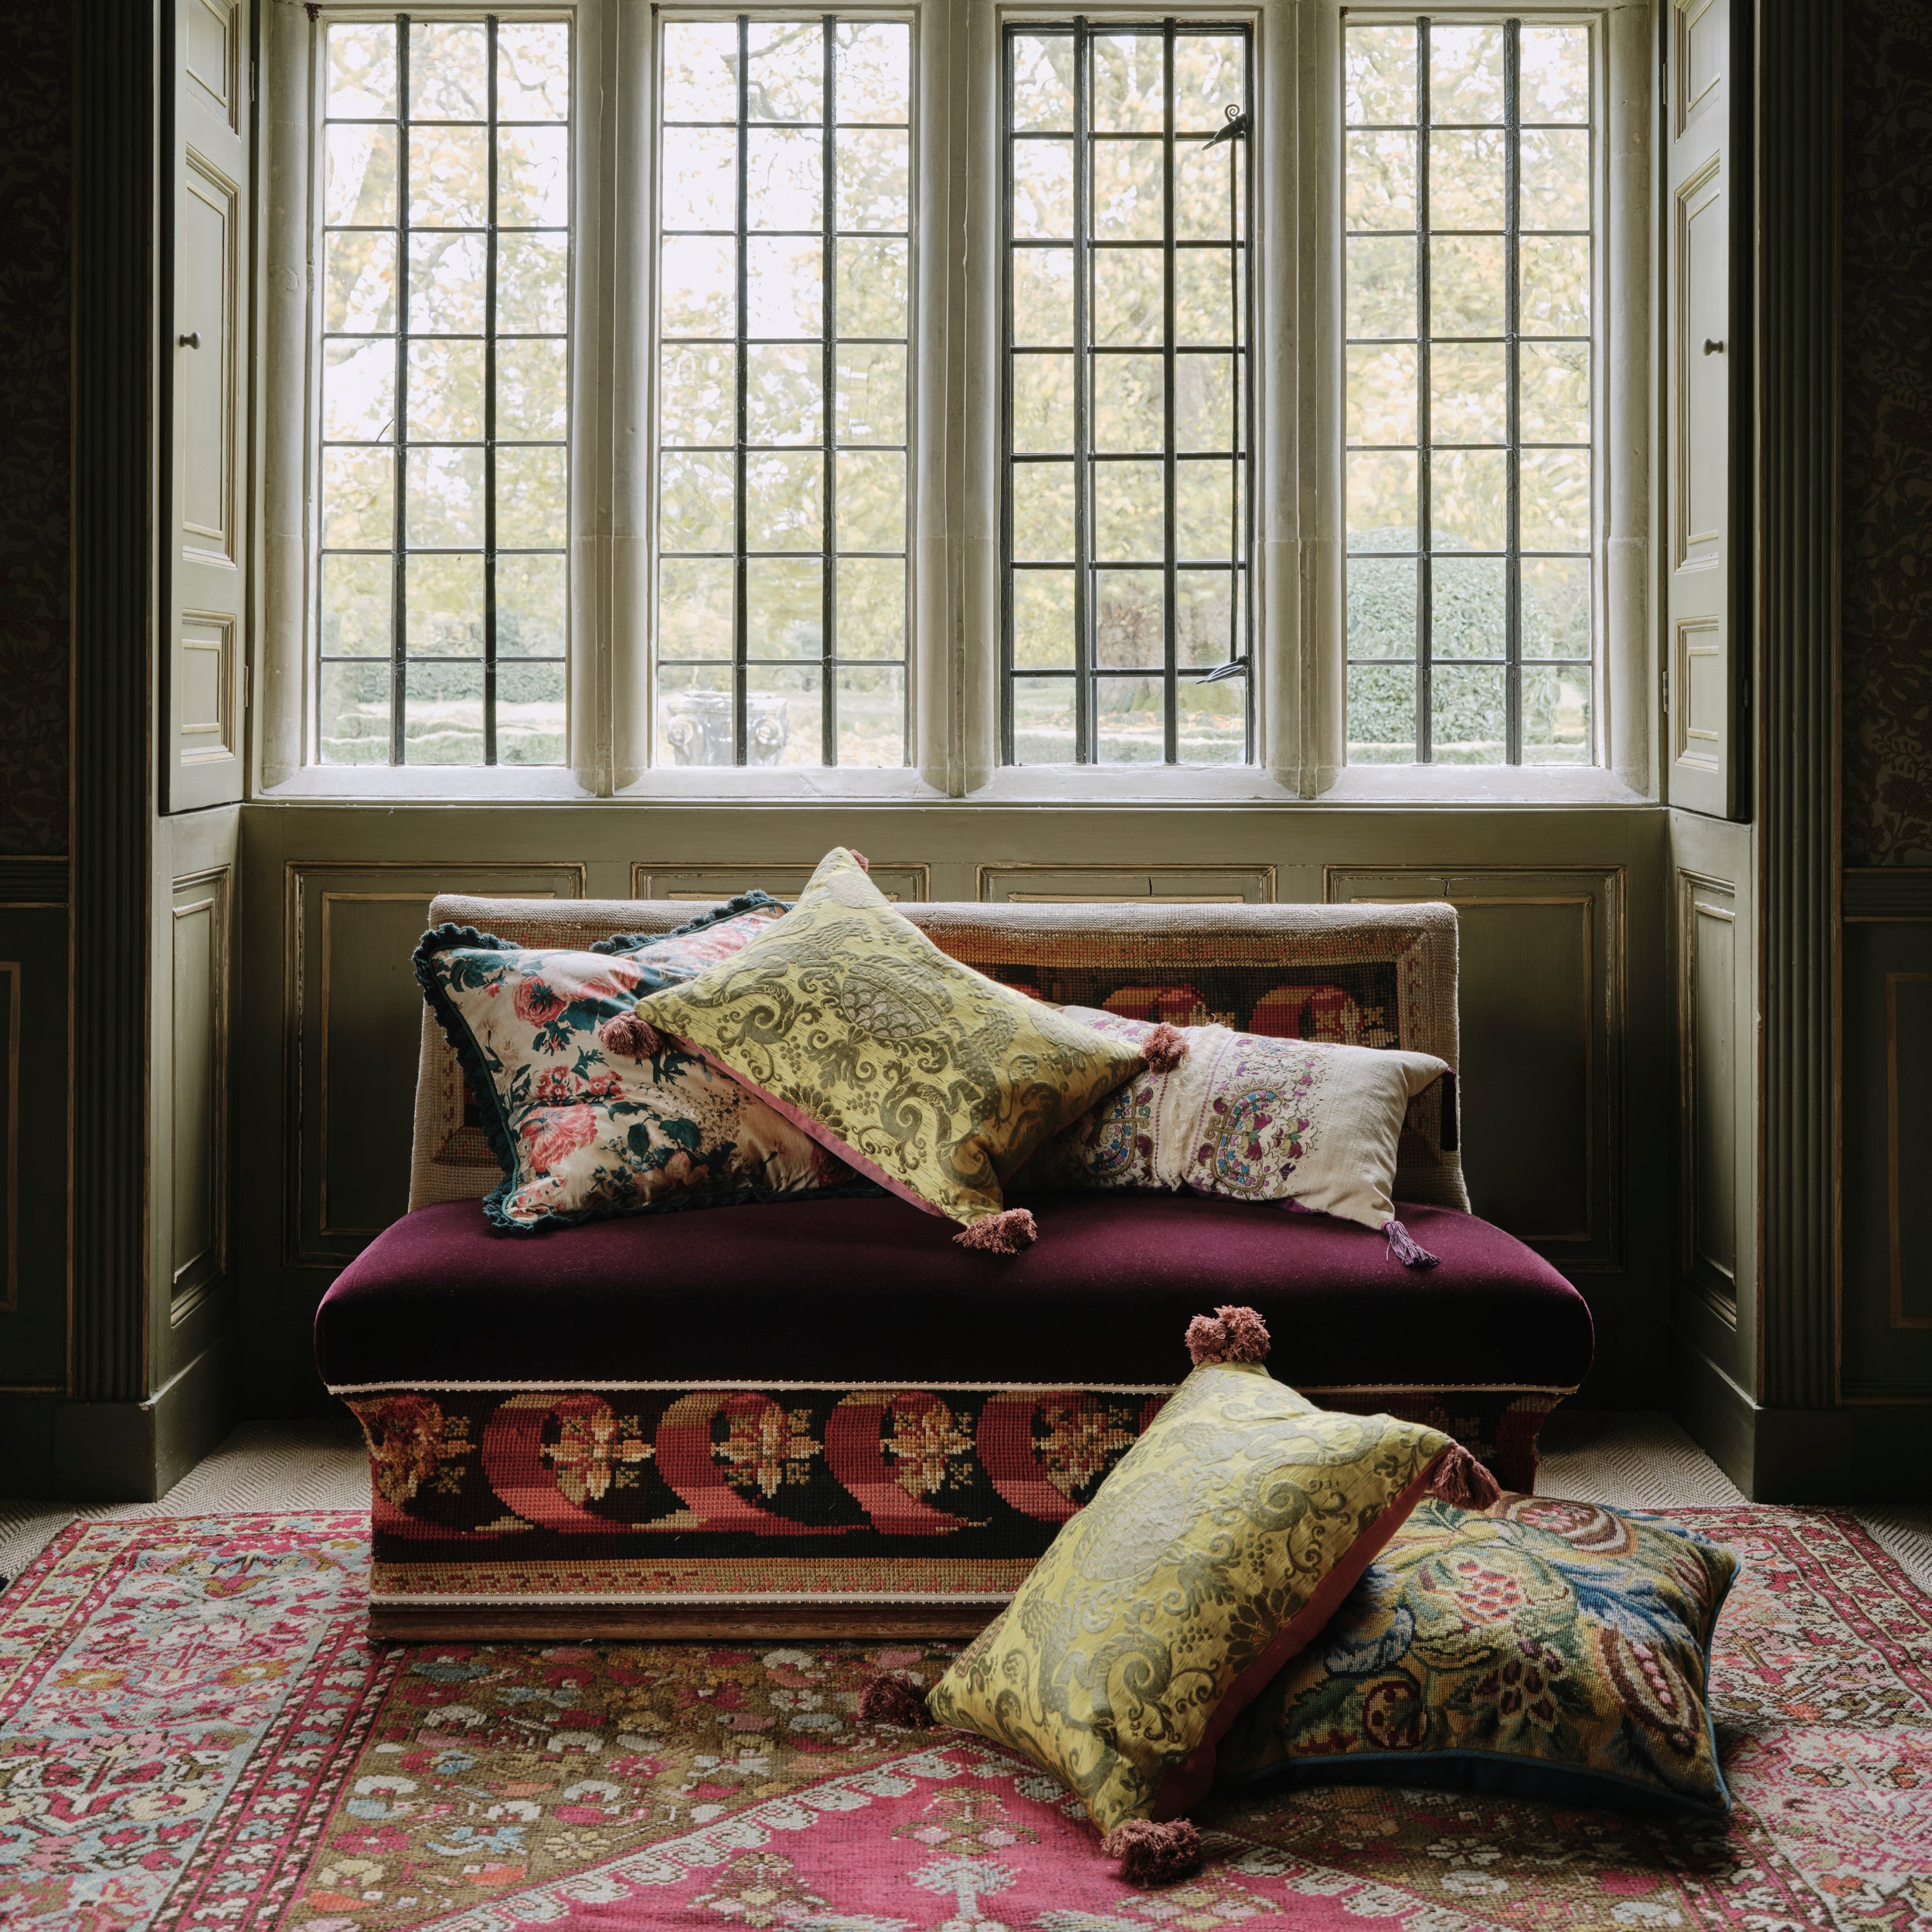 An Early 19th Century Ottoman Sofa with a Needlework and Mohair Velvet Upholstery